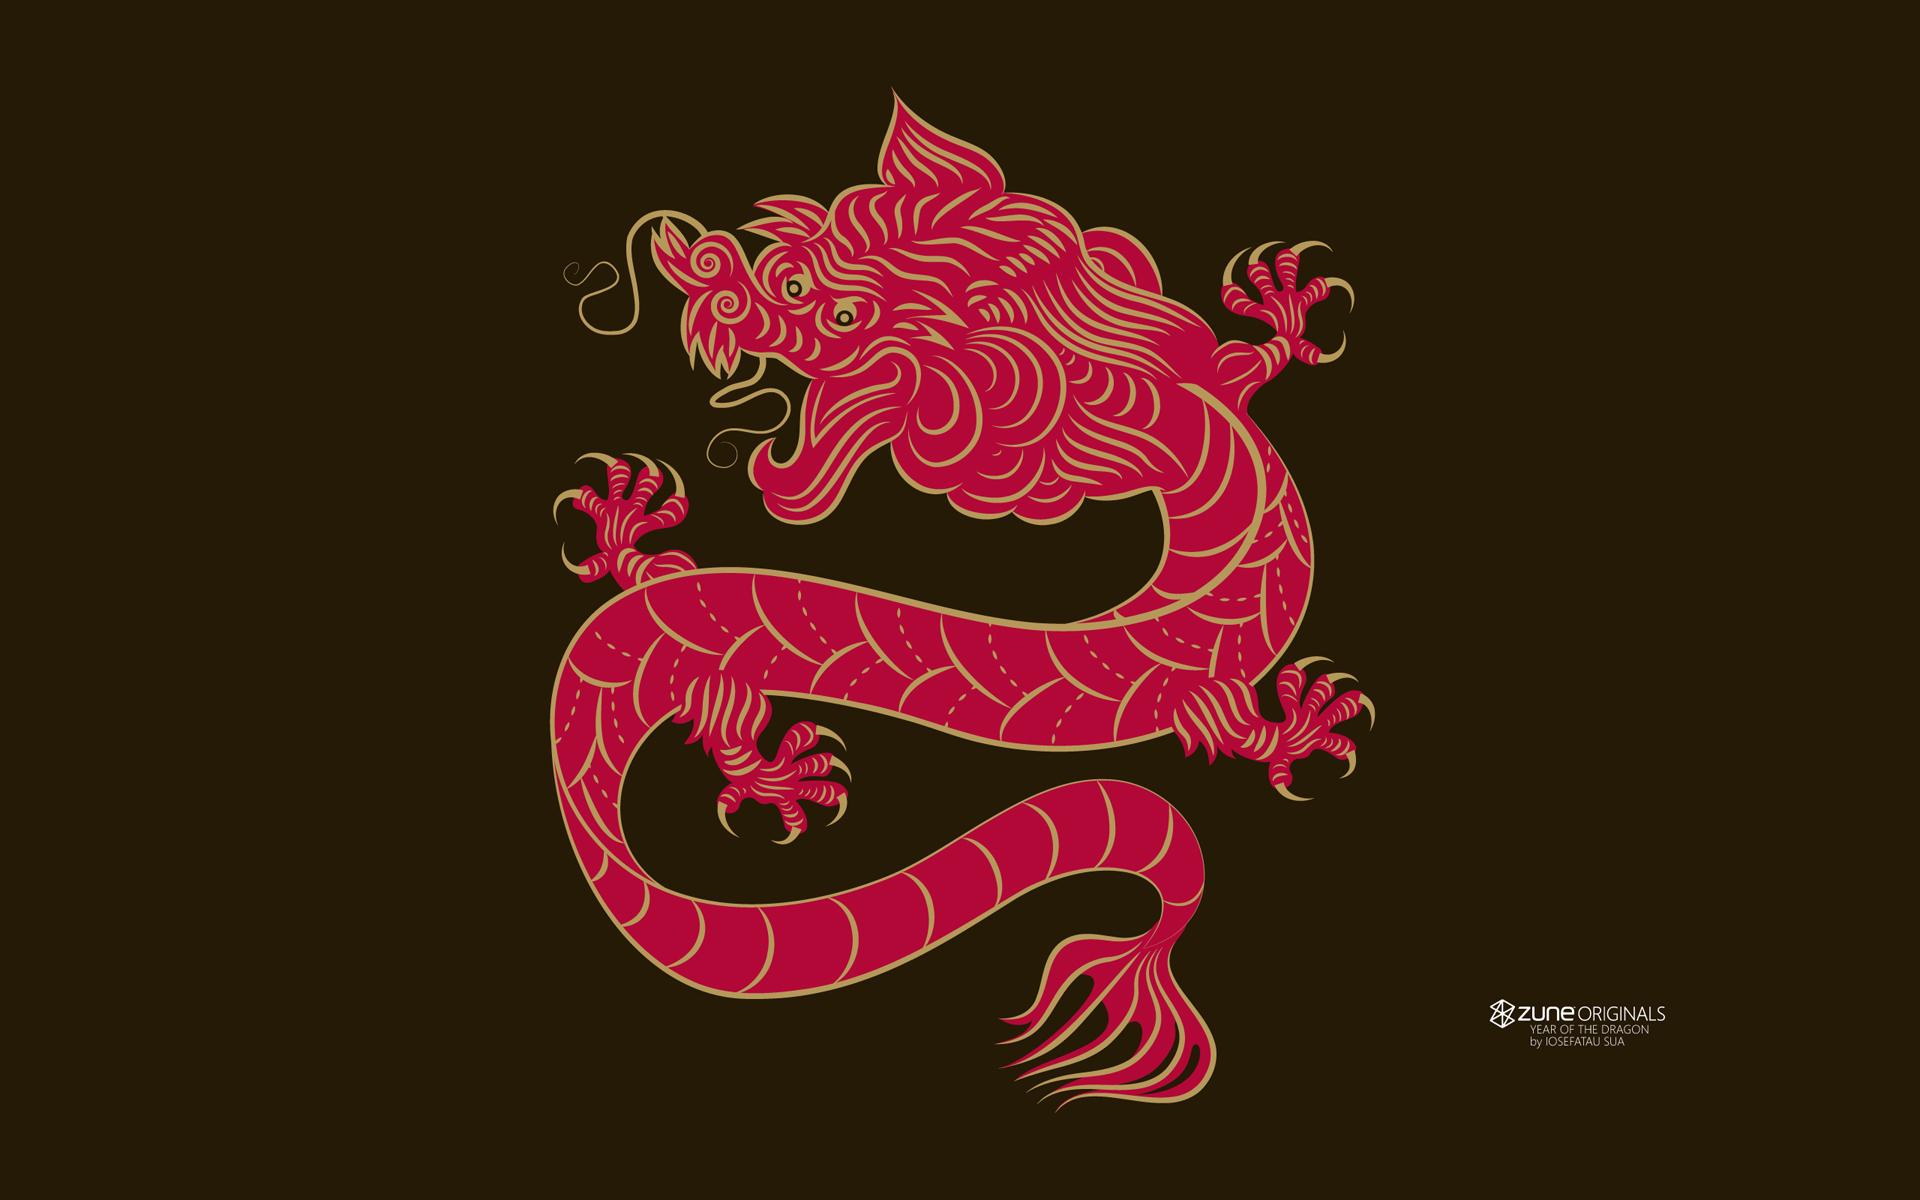 android products, zune, dragon, year of the dragon, zodiac